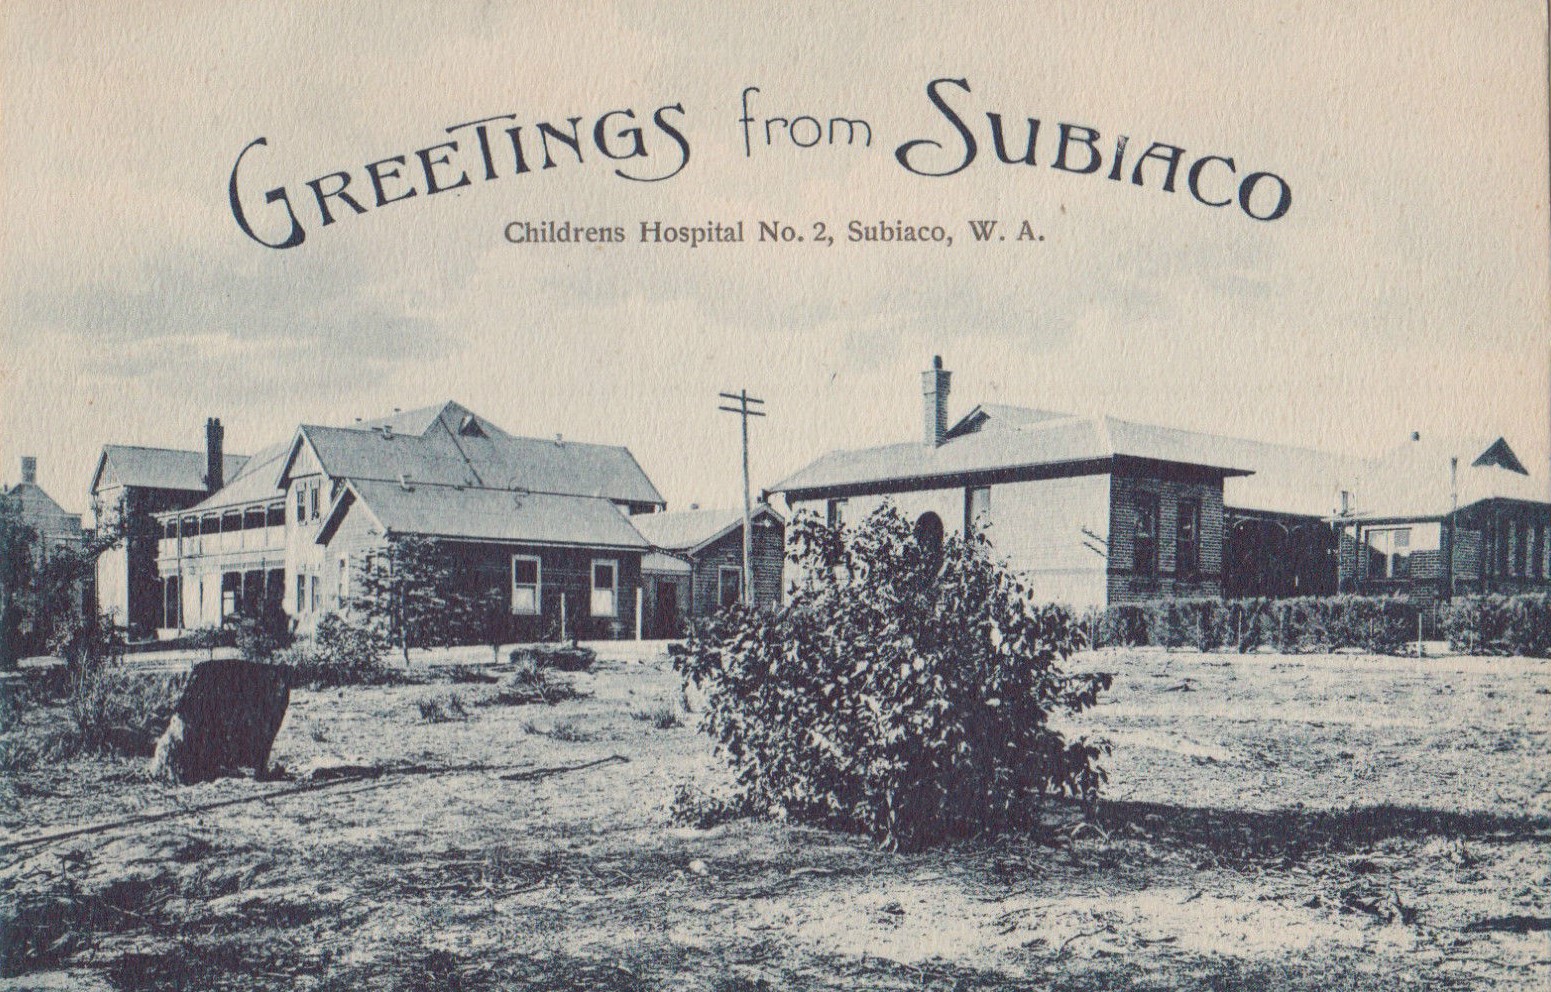 view of the children's hospital with the text 'greetings from Subiaco'